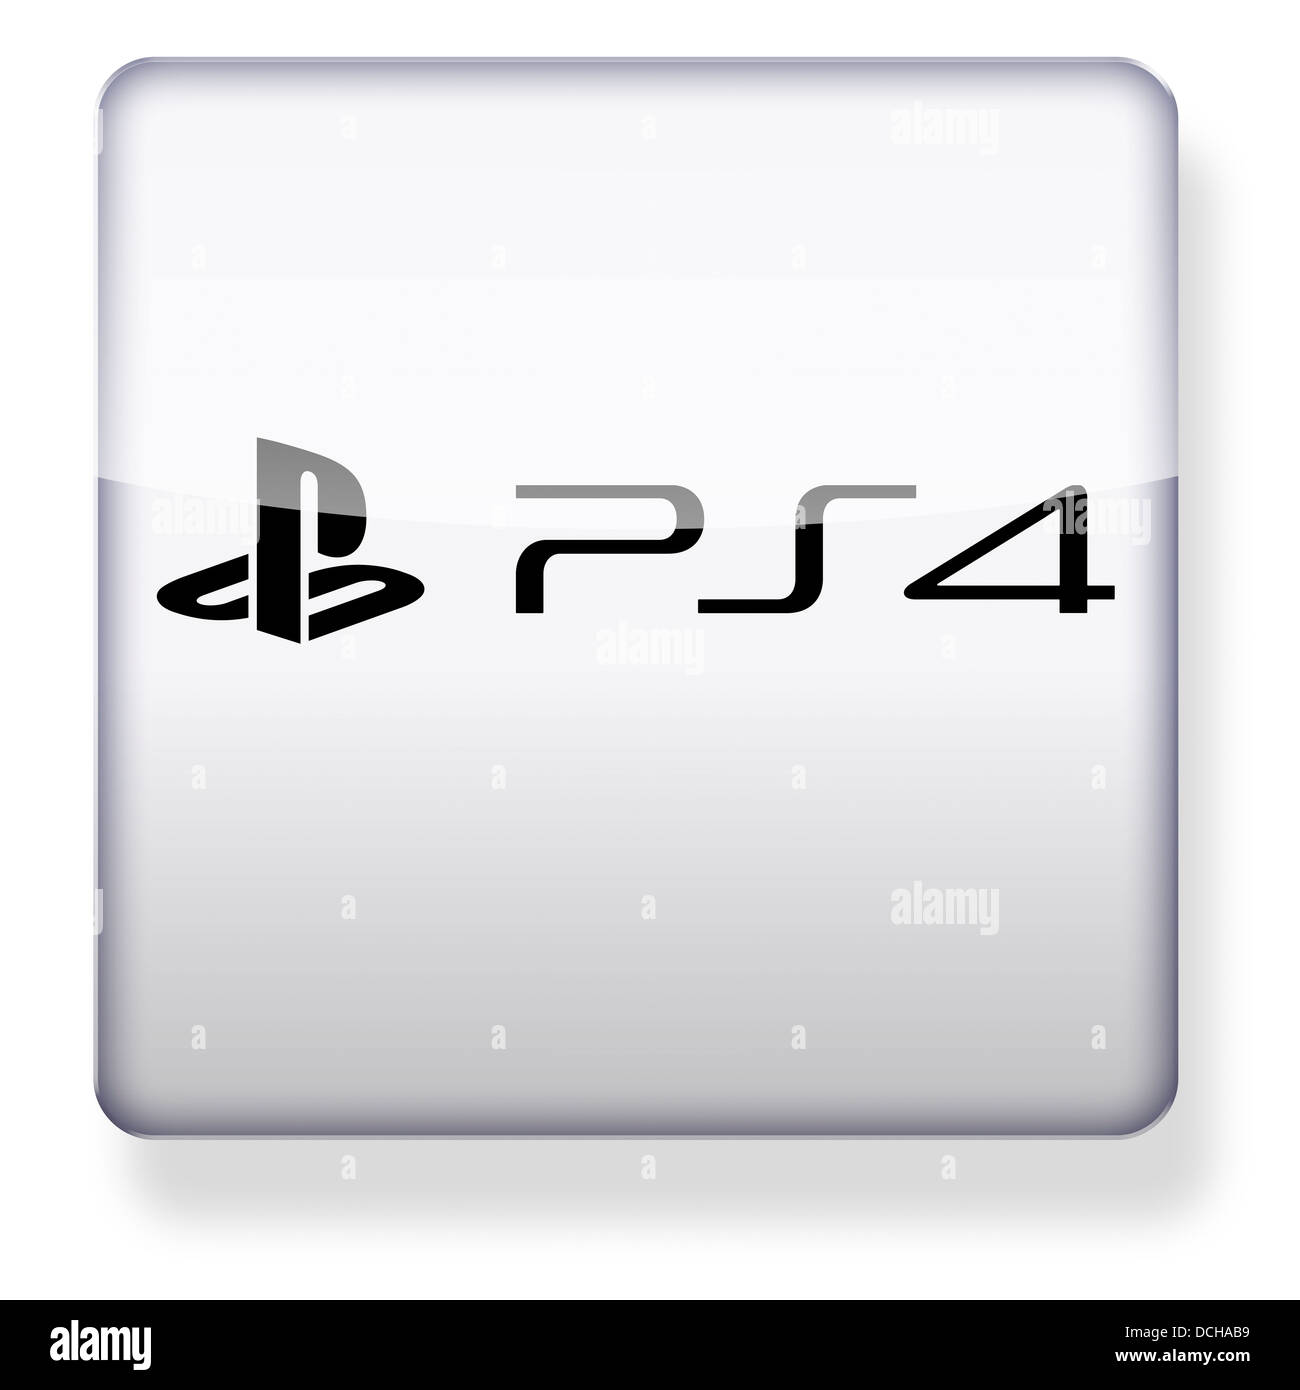 Playstation 4 PS4 logo as an app icon. Clipping path included Stock Photo -  Alamy